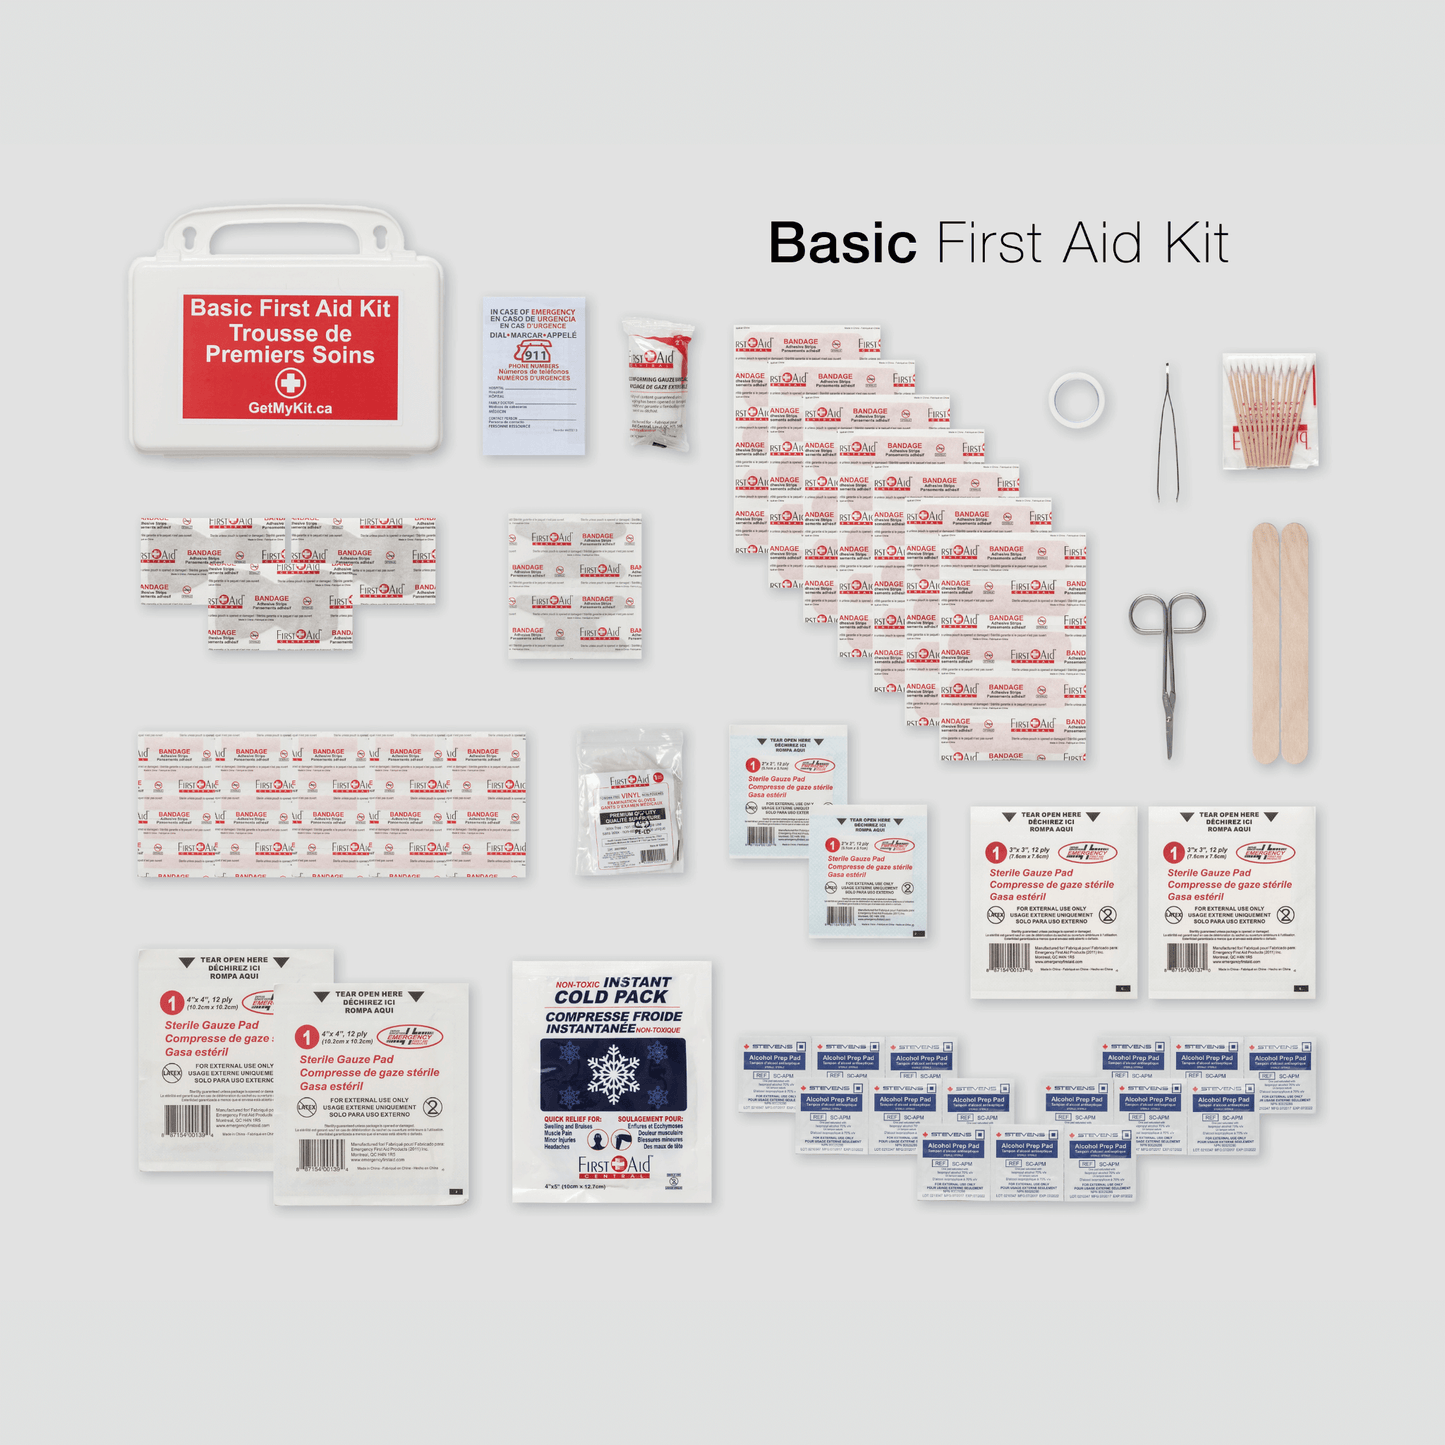 Basic first aid kit supplies in a plastic case.